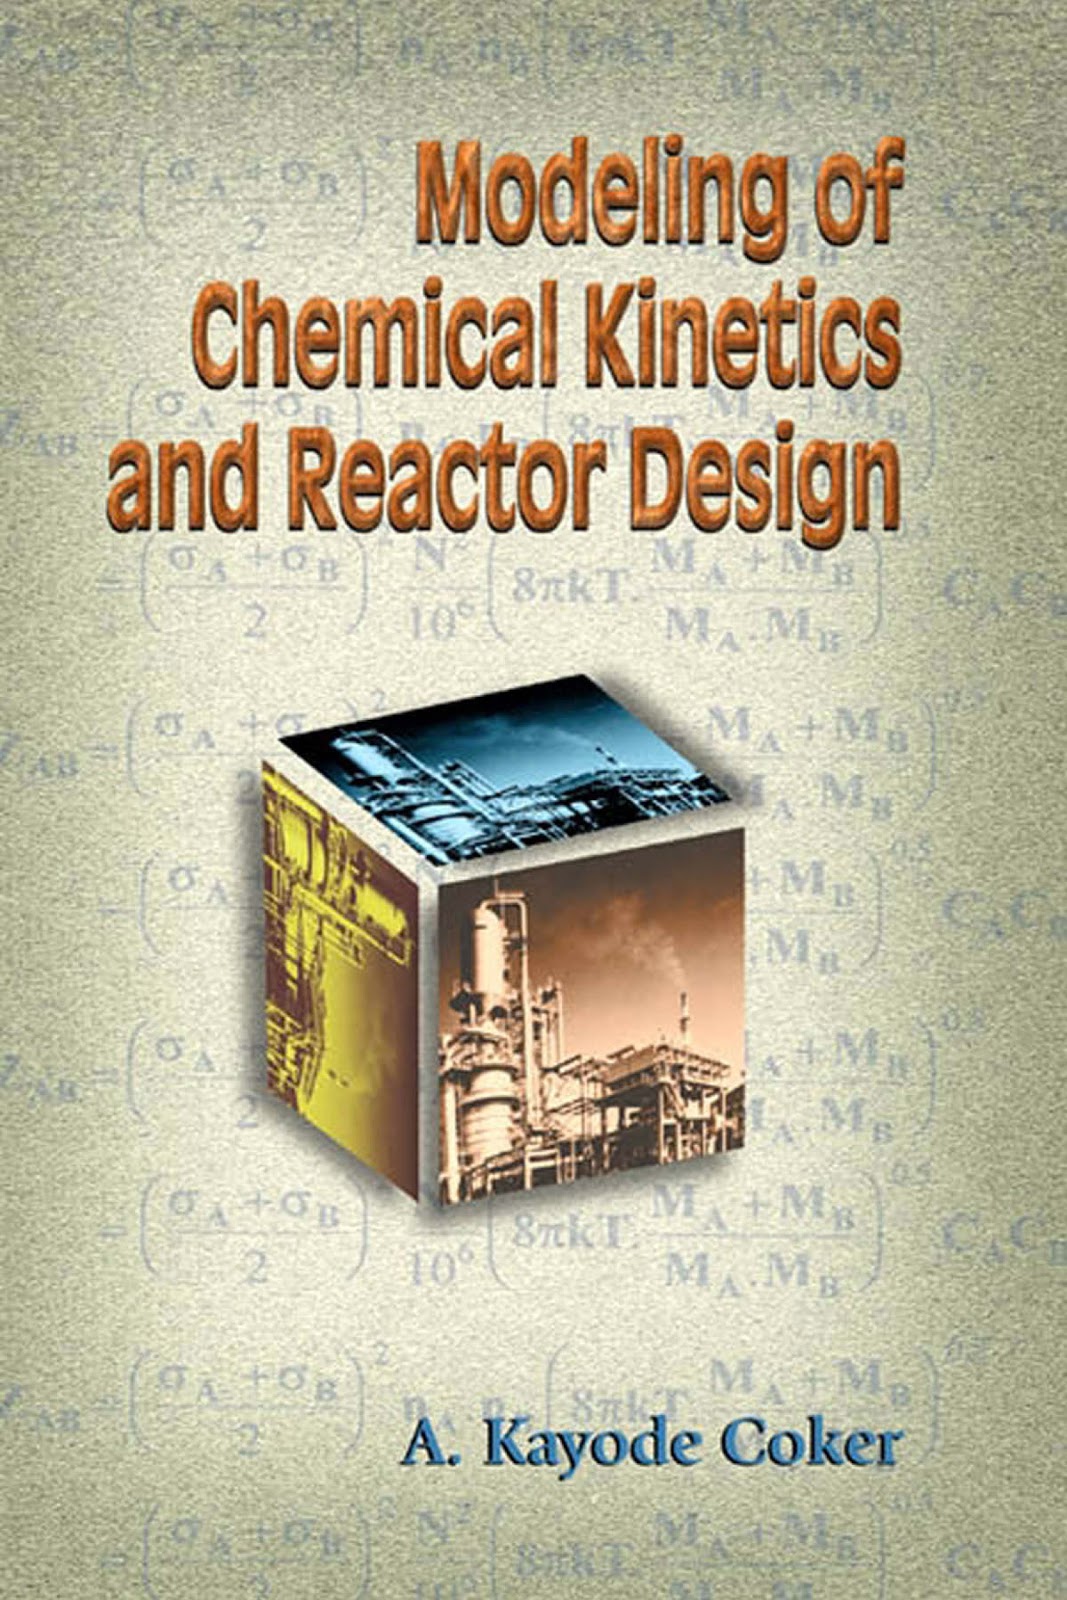 Modeling of chemical kinetics and reactor design A. Kayode Coker